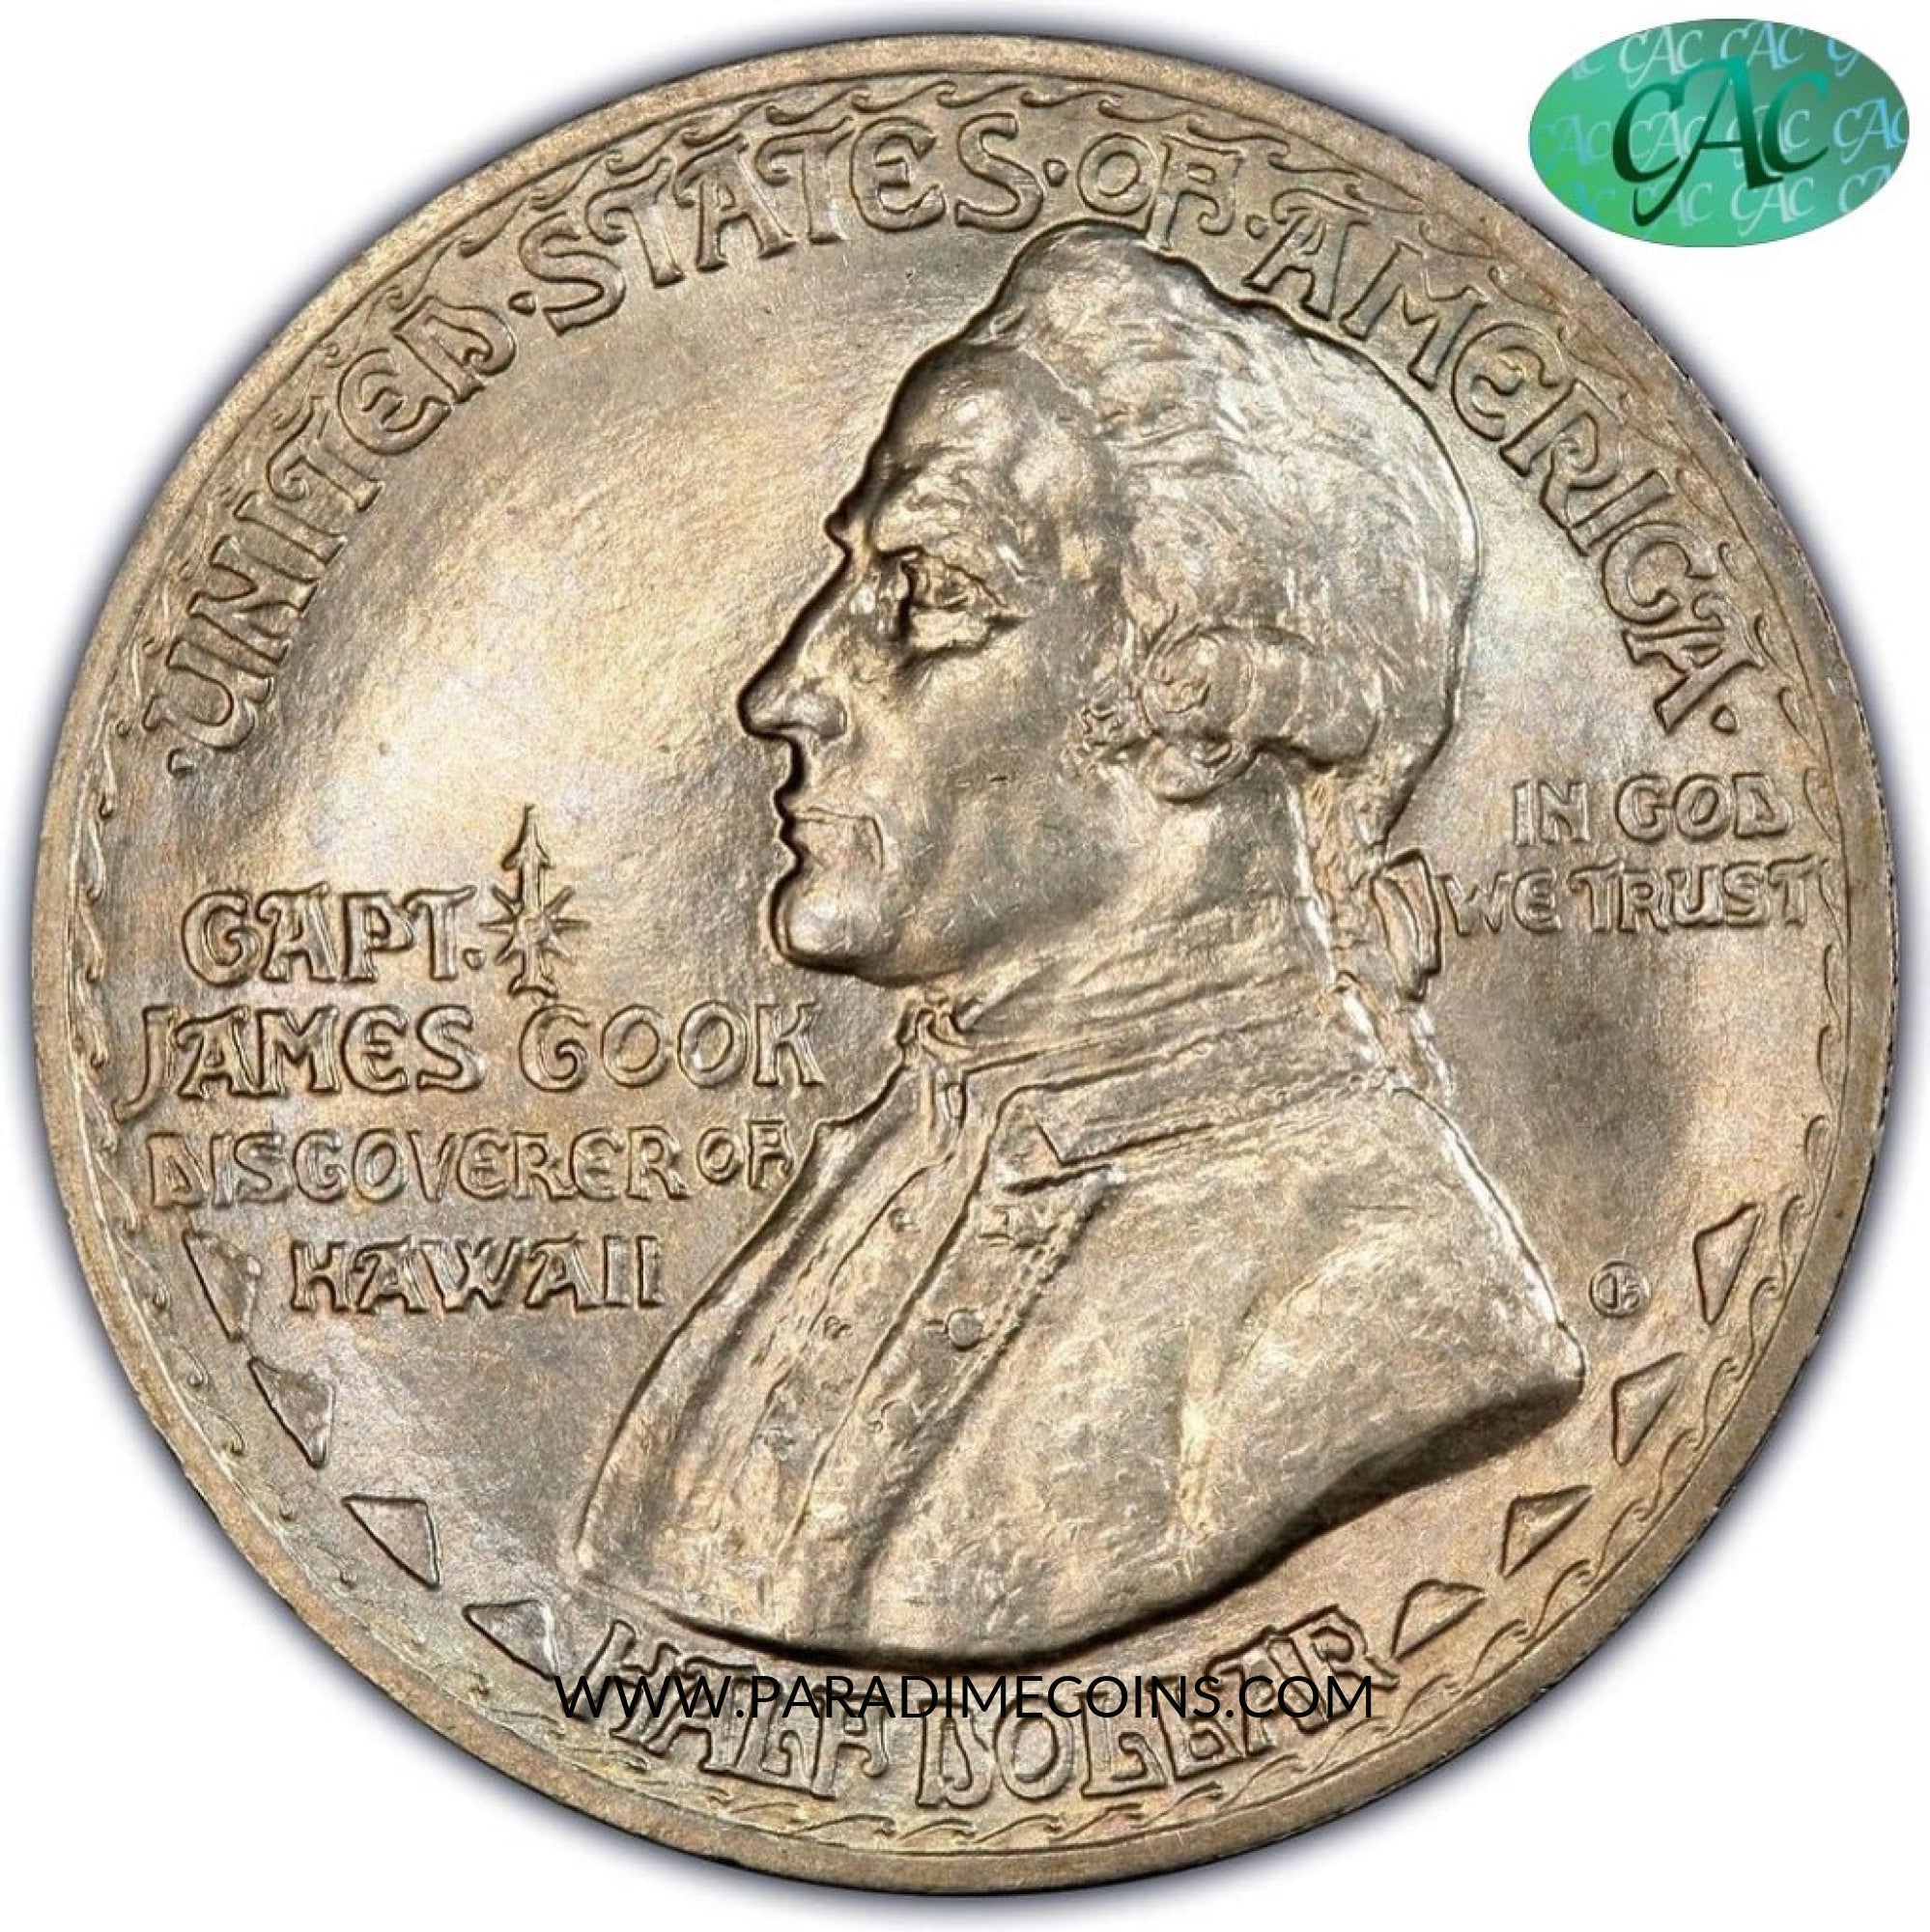 1928 50C HAWAII MS64 PCGS CAC - Paradime Coins | PCGS NGC CACG CAC Rare US Numismatic Coins For Sale